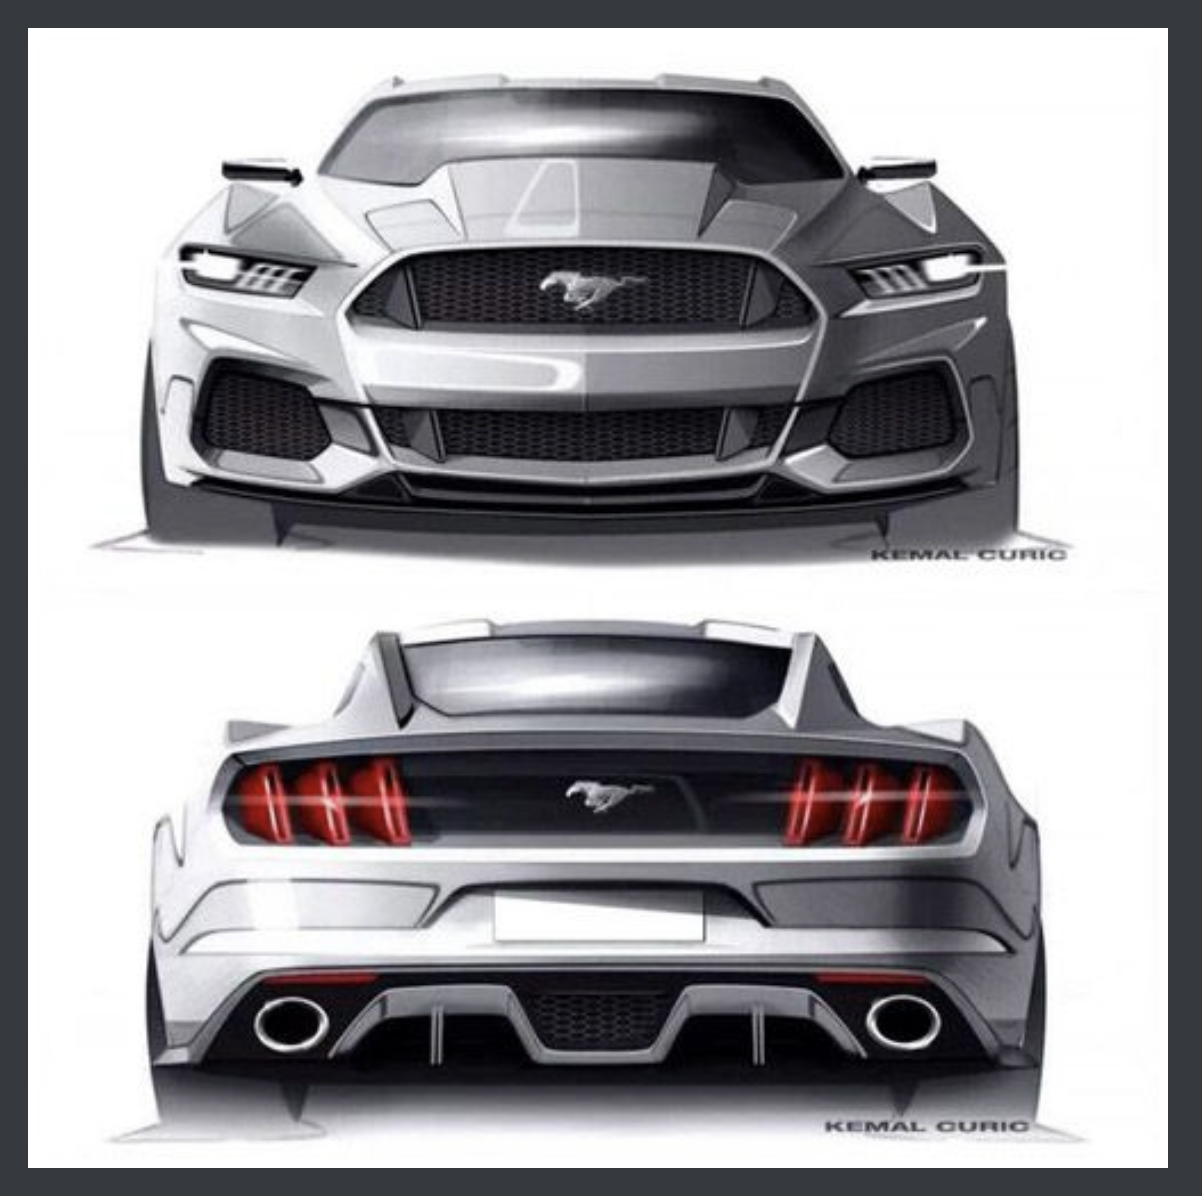 S650 Mustang S650 Mustang rendered by Sketch Monkey 1649520196706